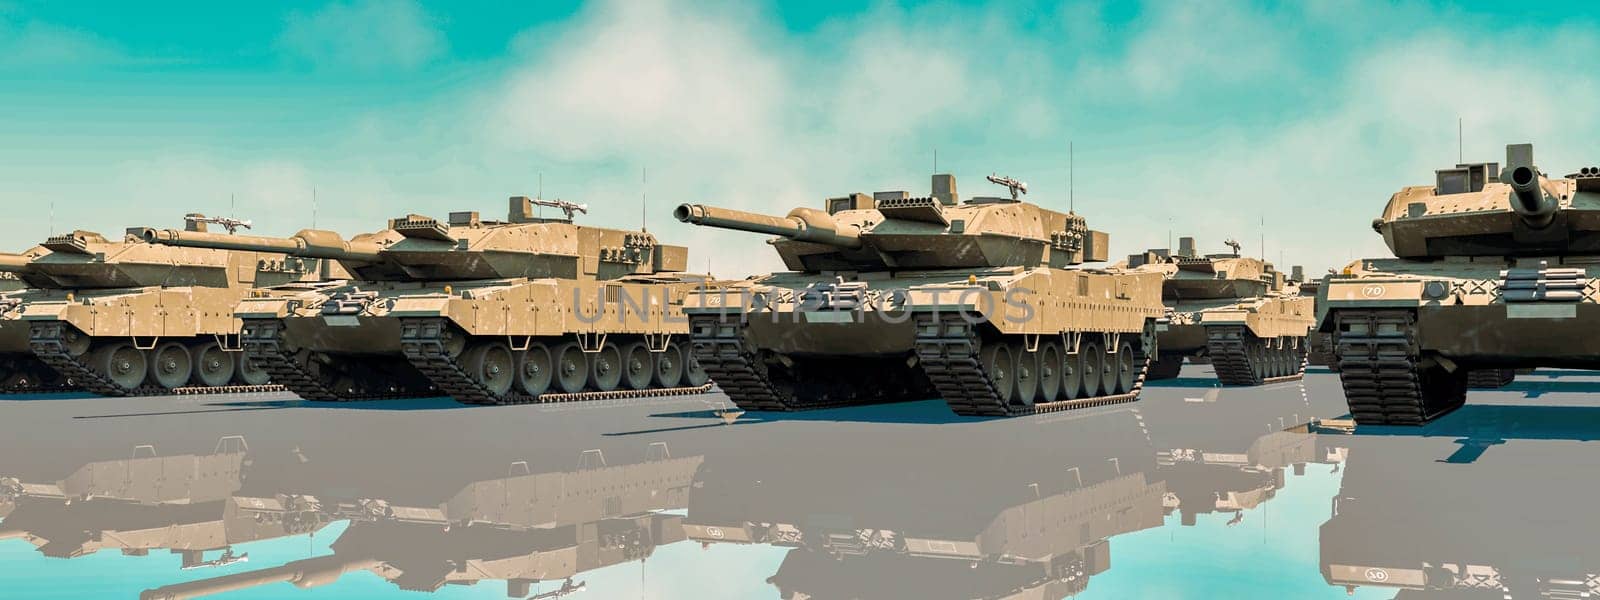 A formidable array of tanks displays military power, mirrored on a glossy surface beneath a clear sky